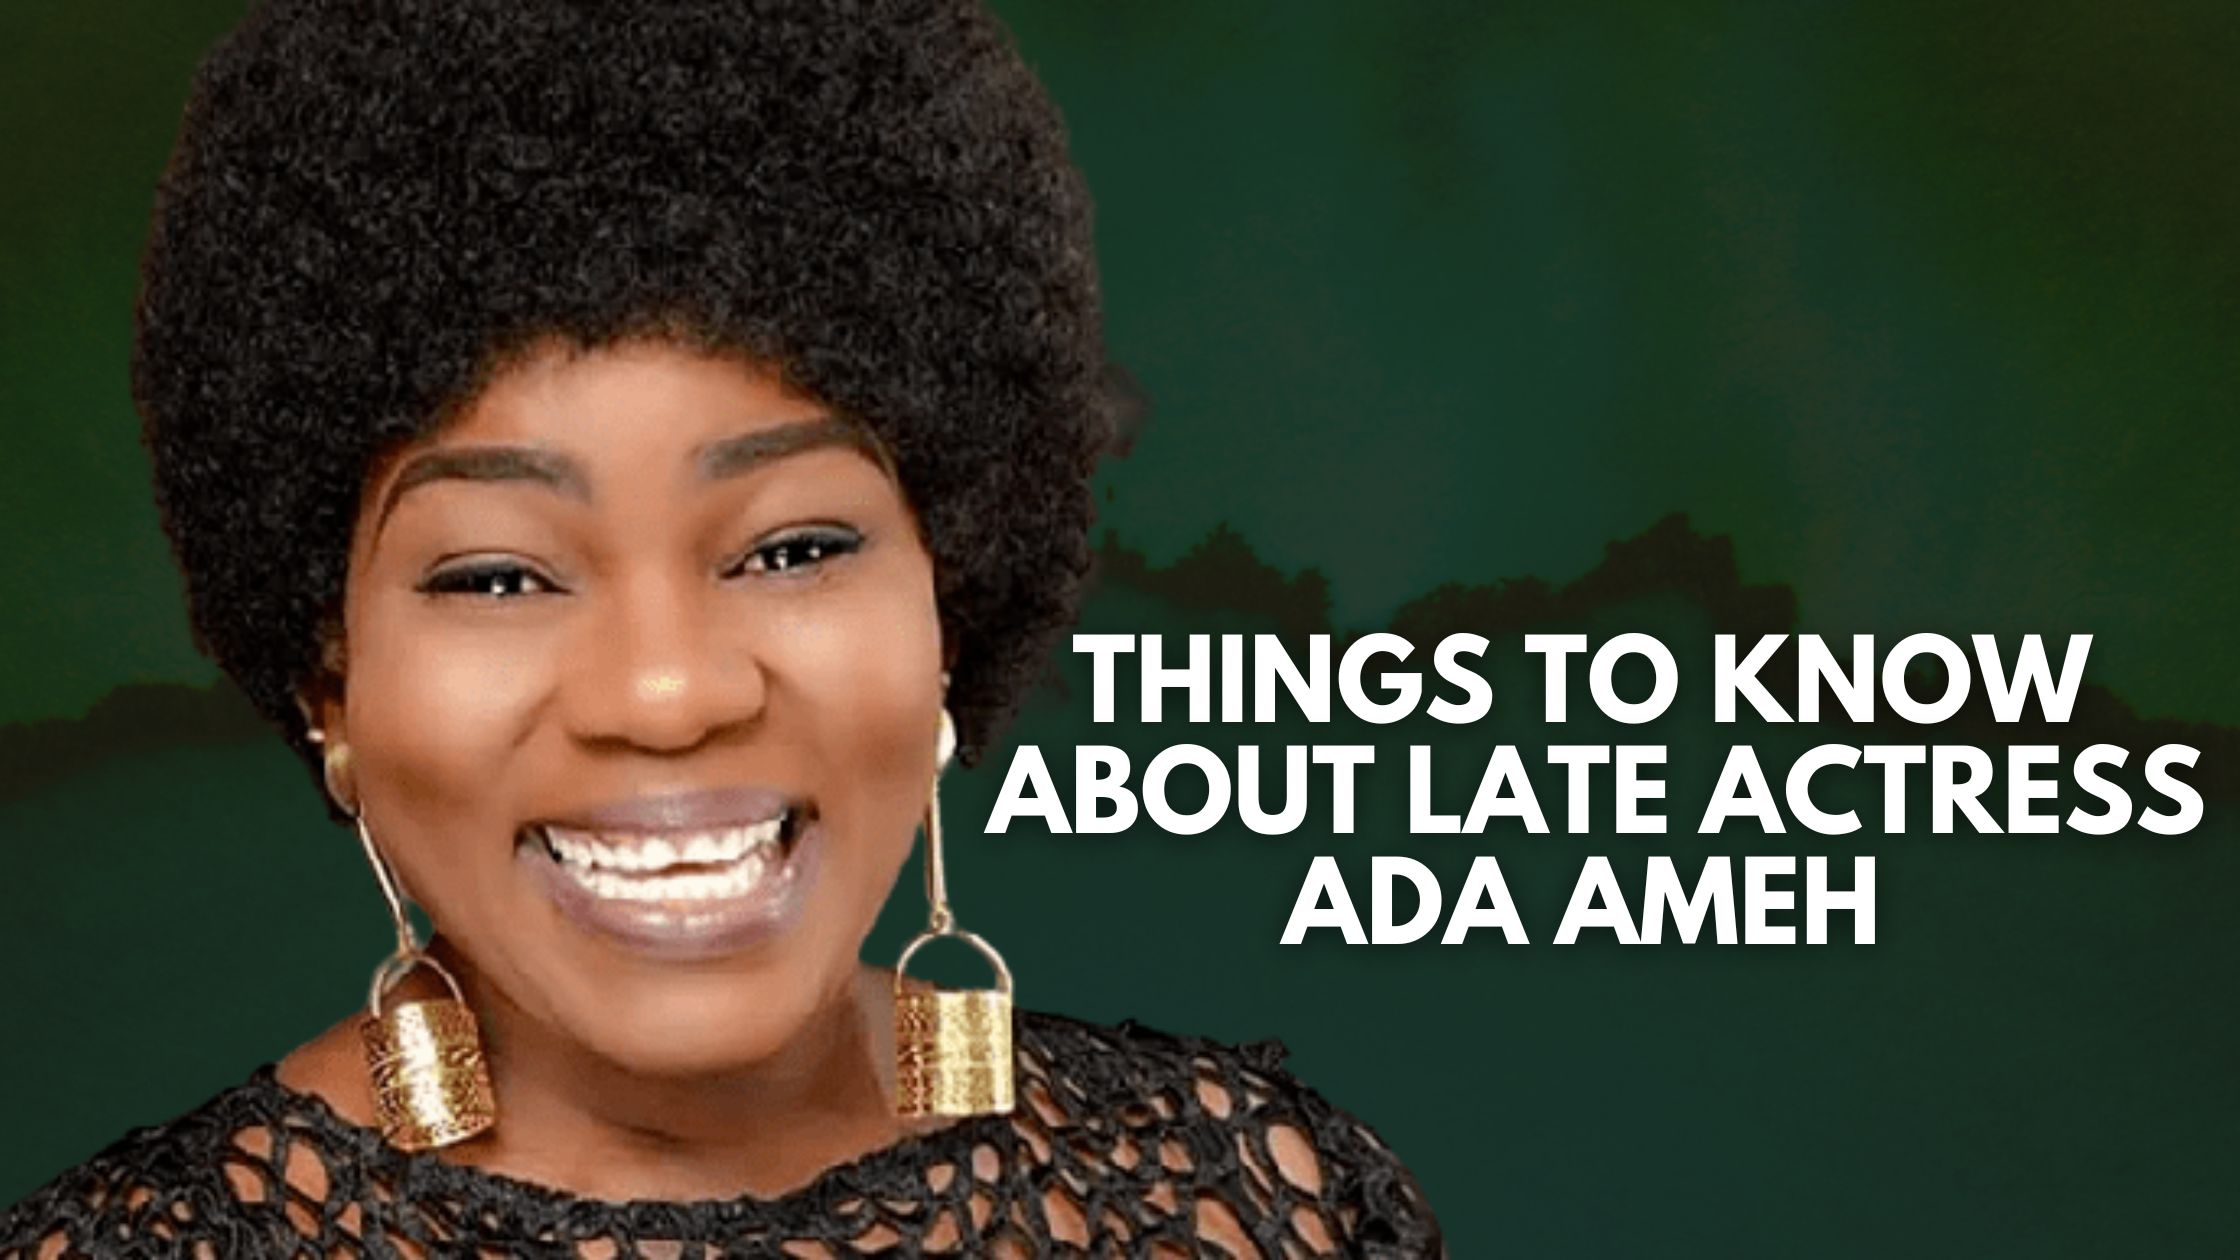 Things to know about Ada Ameh